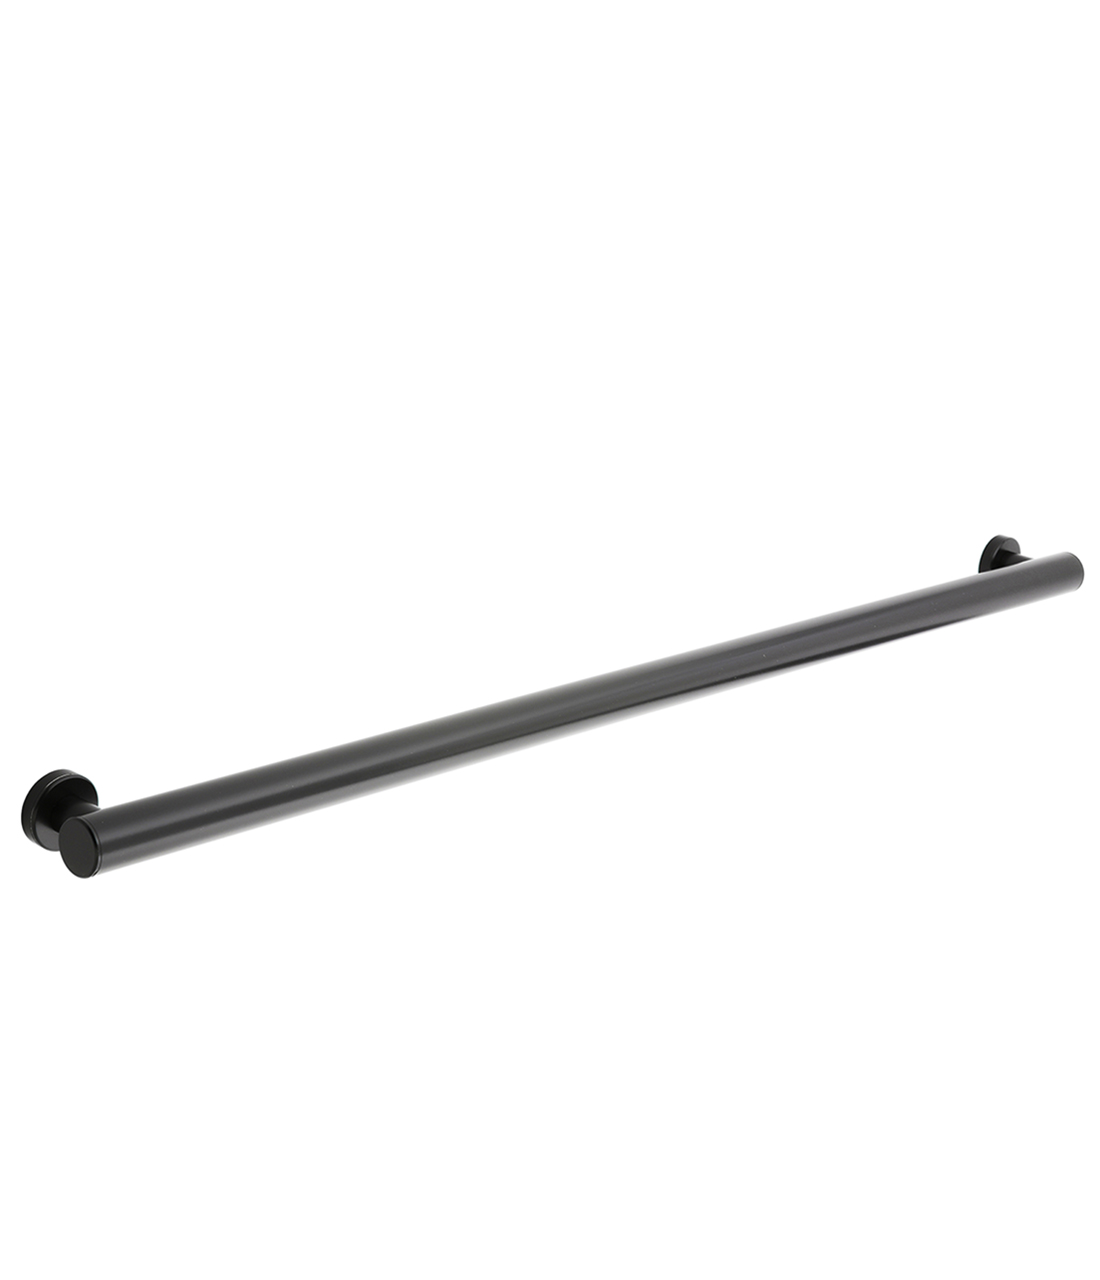 Straight Grab Bar, Matte Black (for UK, EU and AUS only) Image